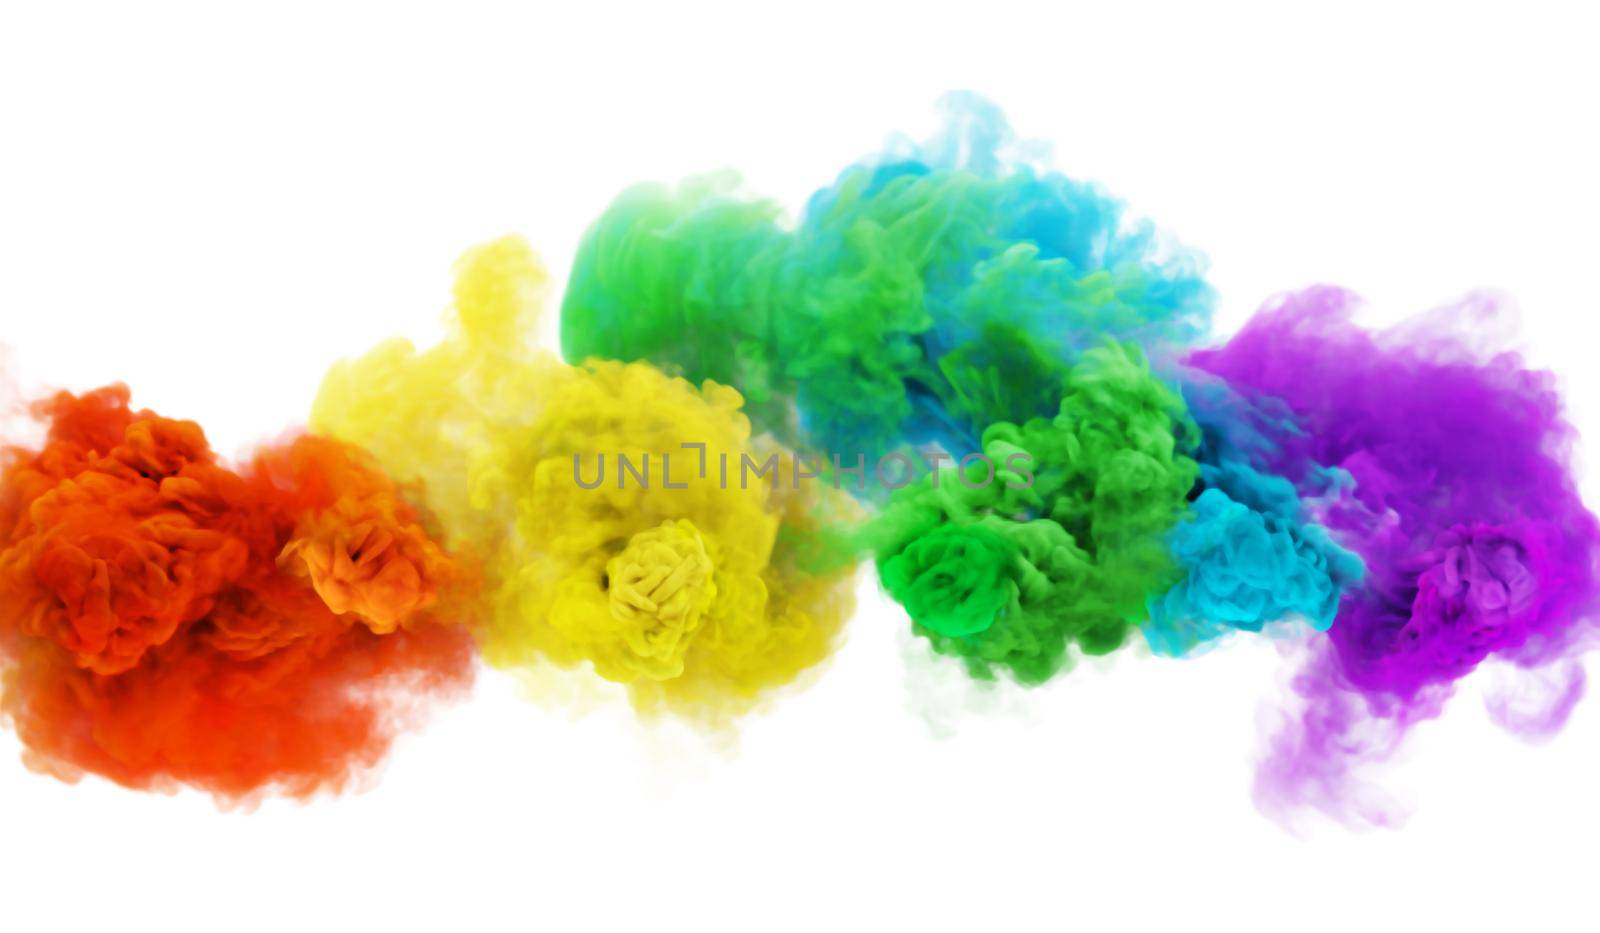 Rainbow color puffs of smoke in white background by Xeniasnowstorm